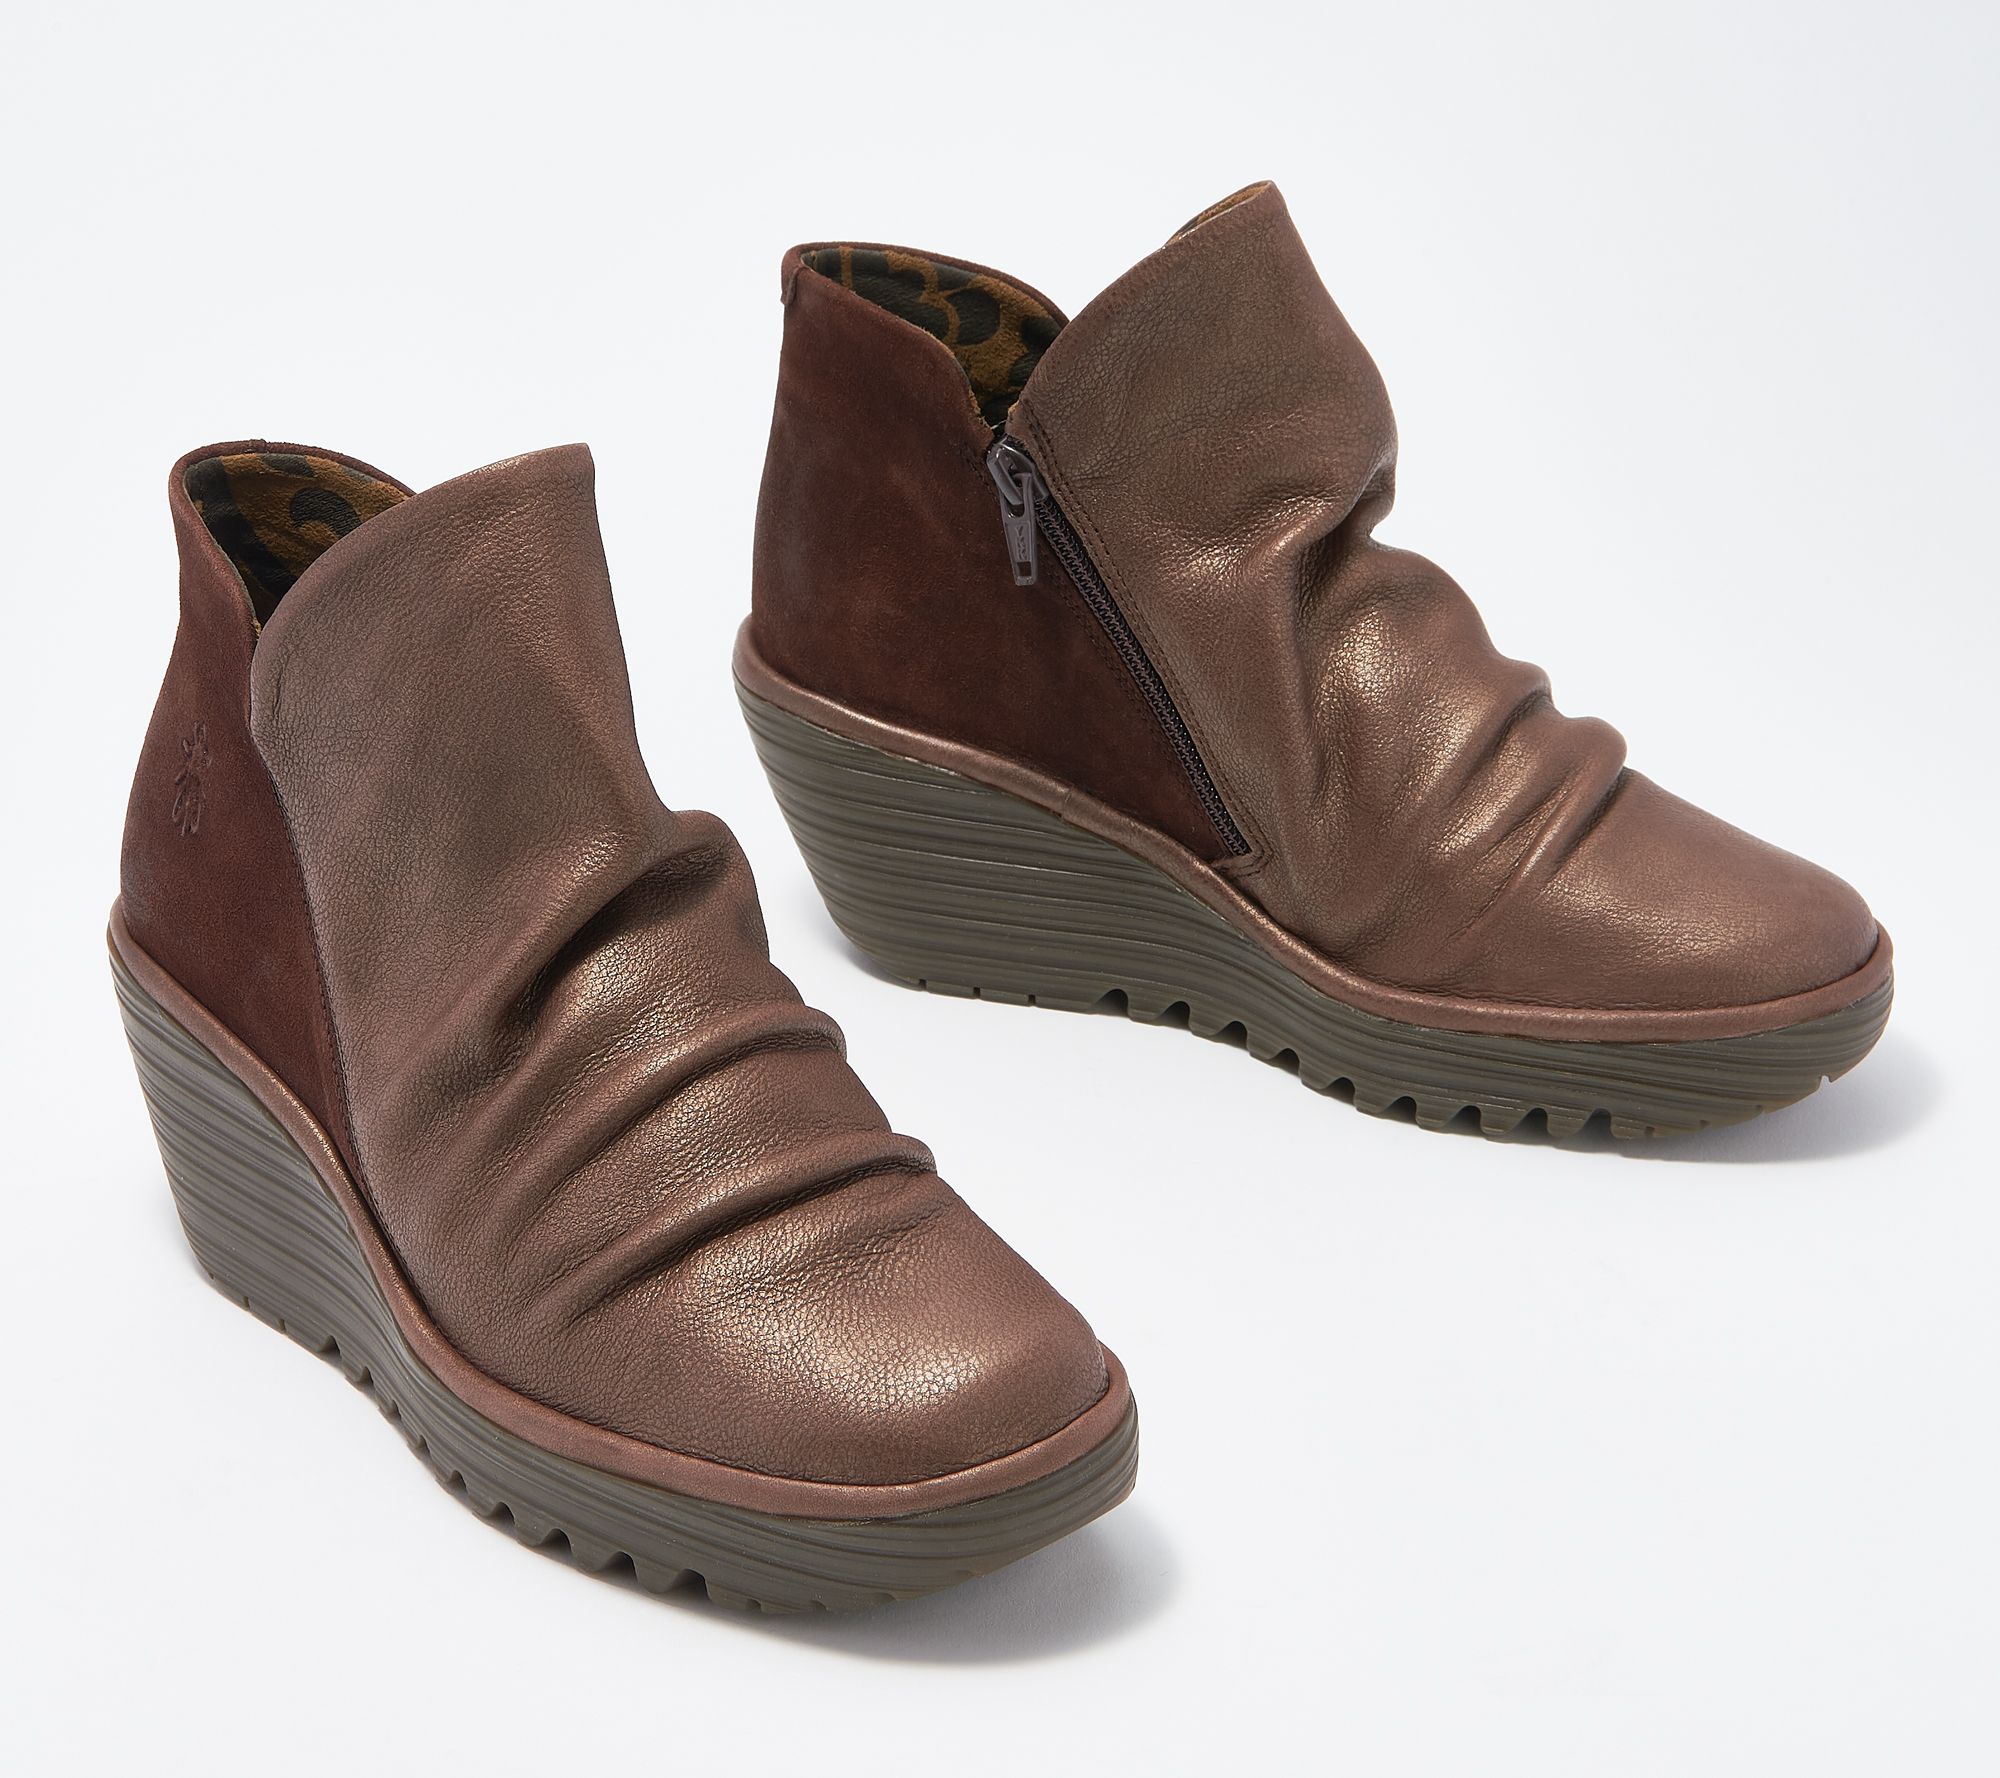 FLY London Leather Ankle Boots - Yip - QVC.com